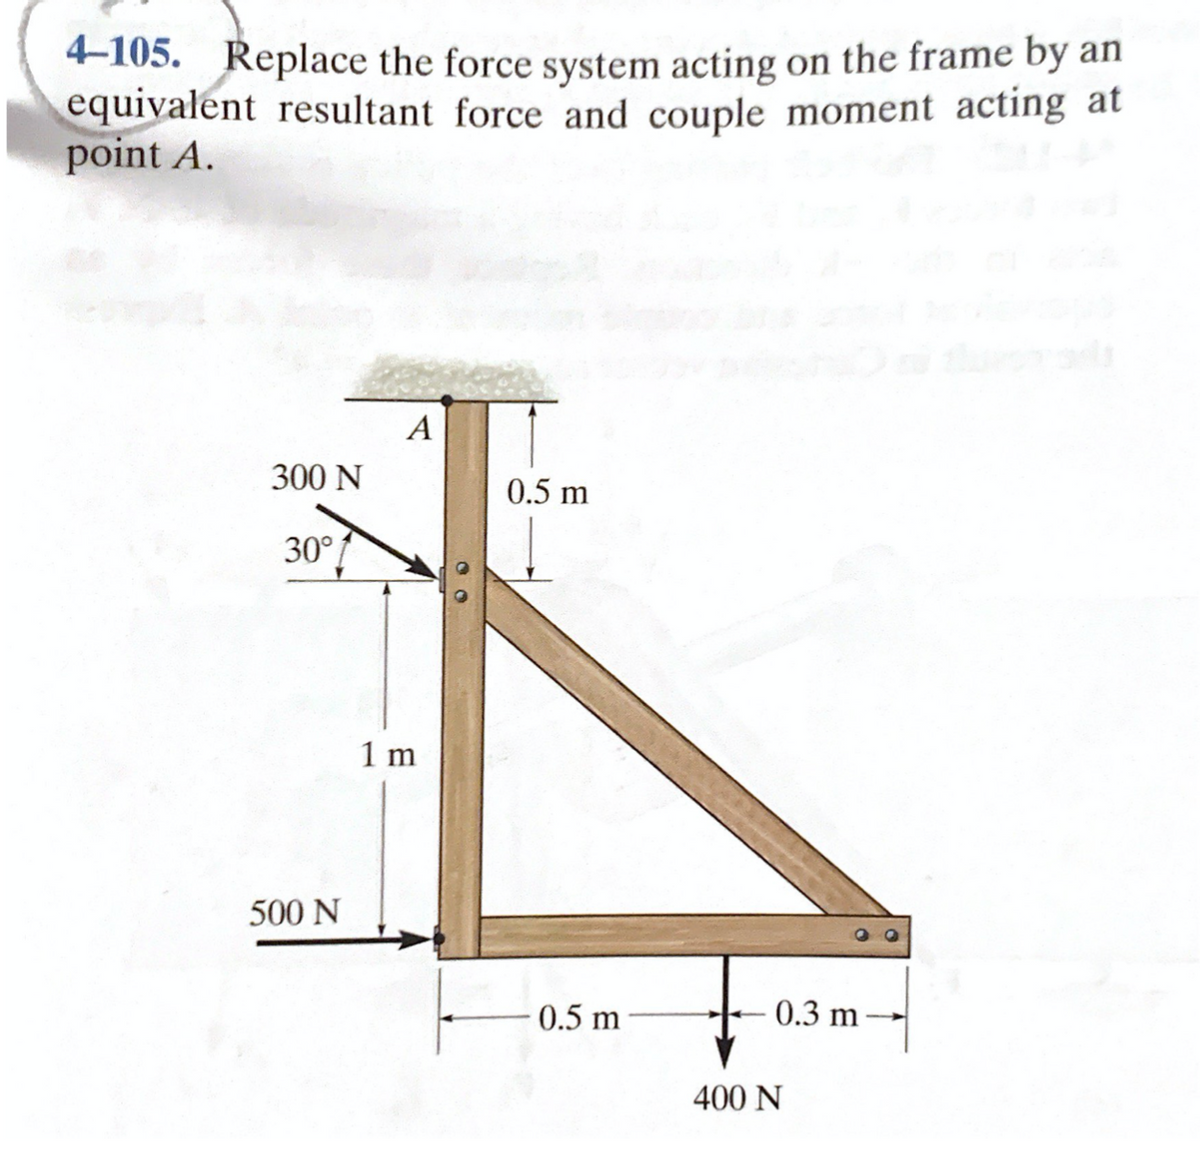 4-105. Replace the force system acting on the frame by an
equivalent resultant force and couple moment acting at
point A.
A
300 N
0.5 m
30°
1 m
500 N
0.5 m
0.3 m
400 N
